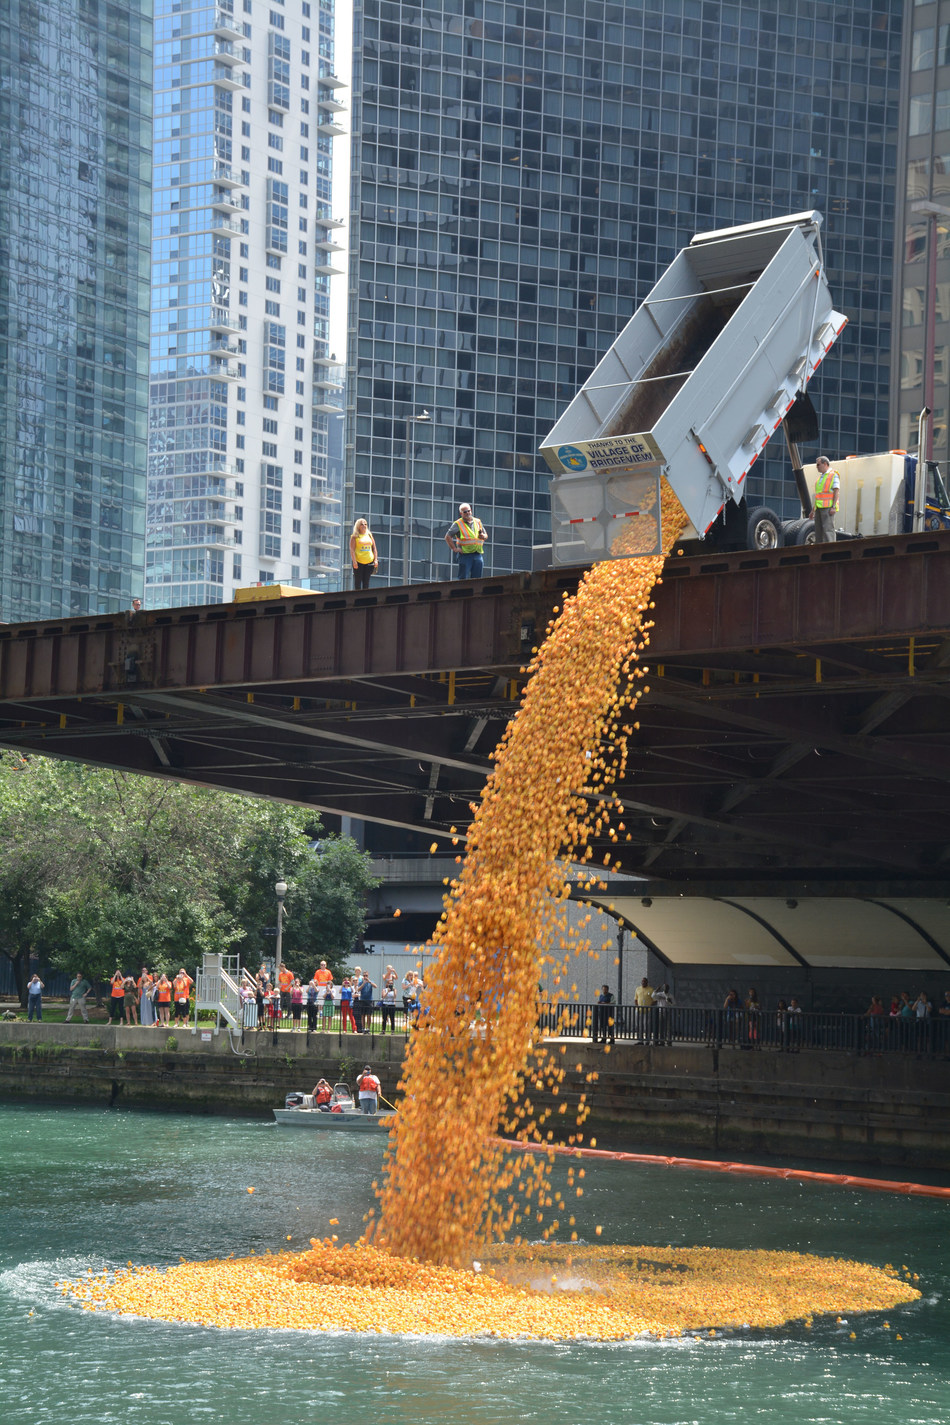 60,000 Rubber Ducks Will Splash into the Chicago River August 3 for